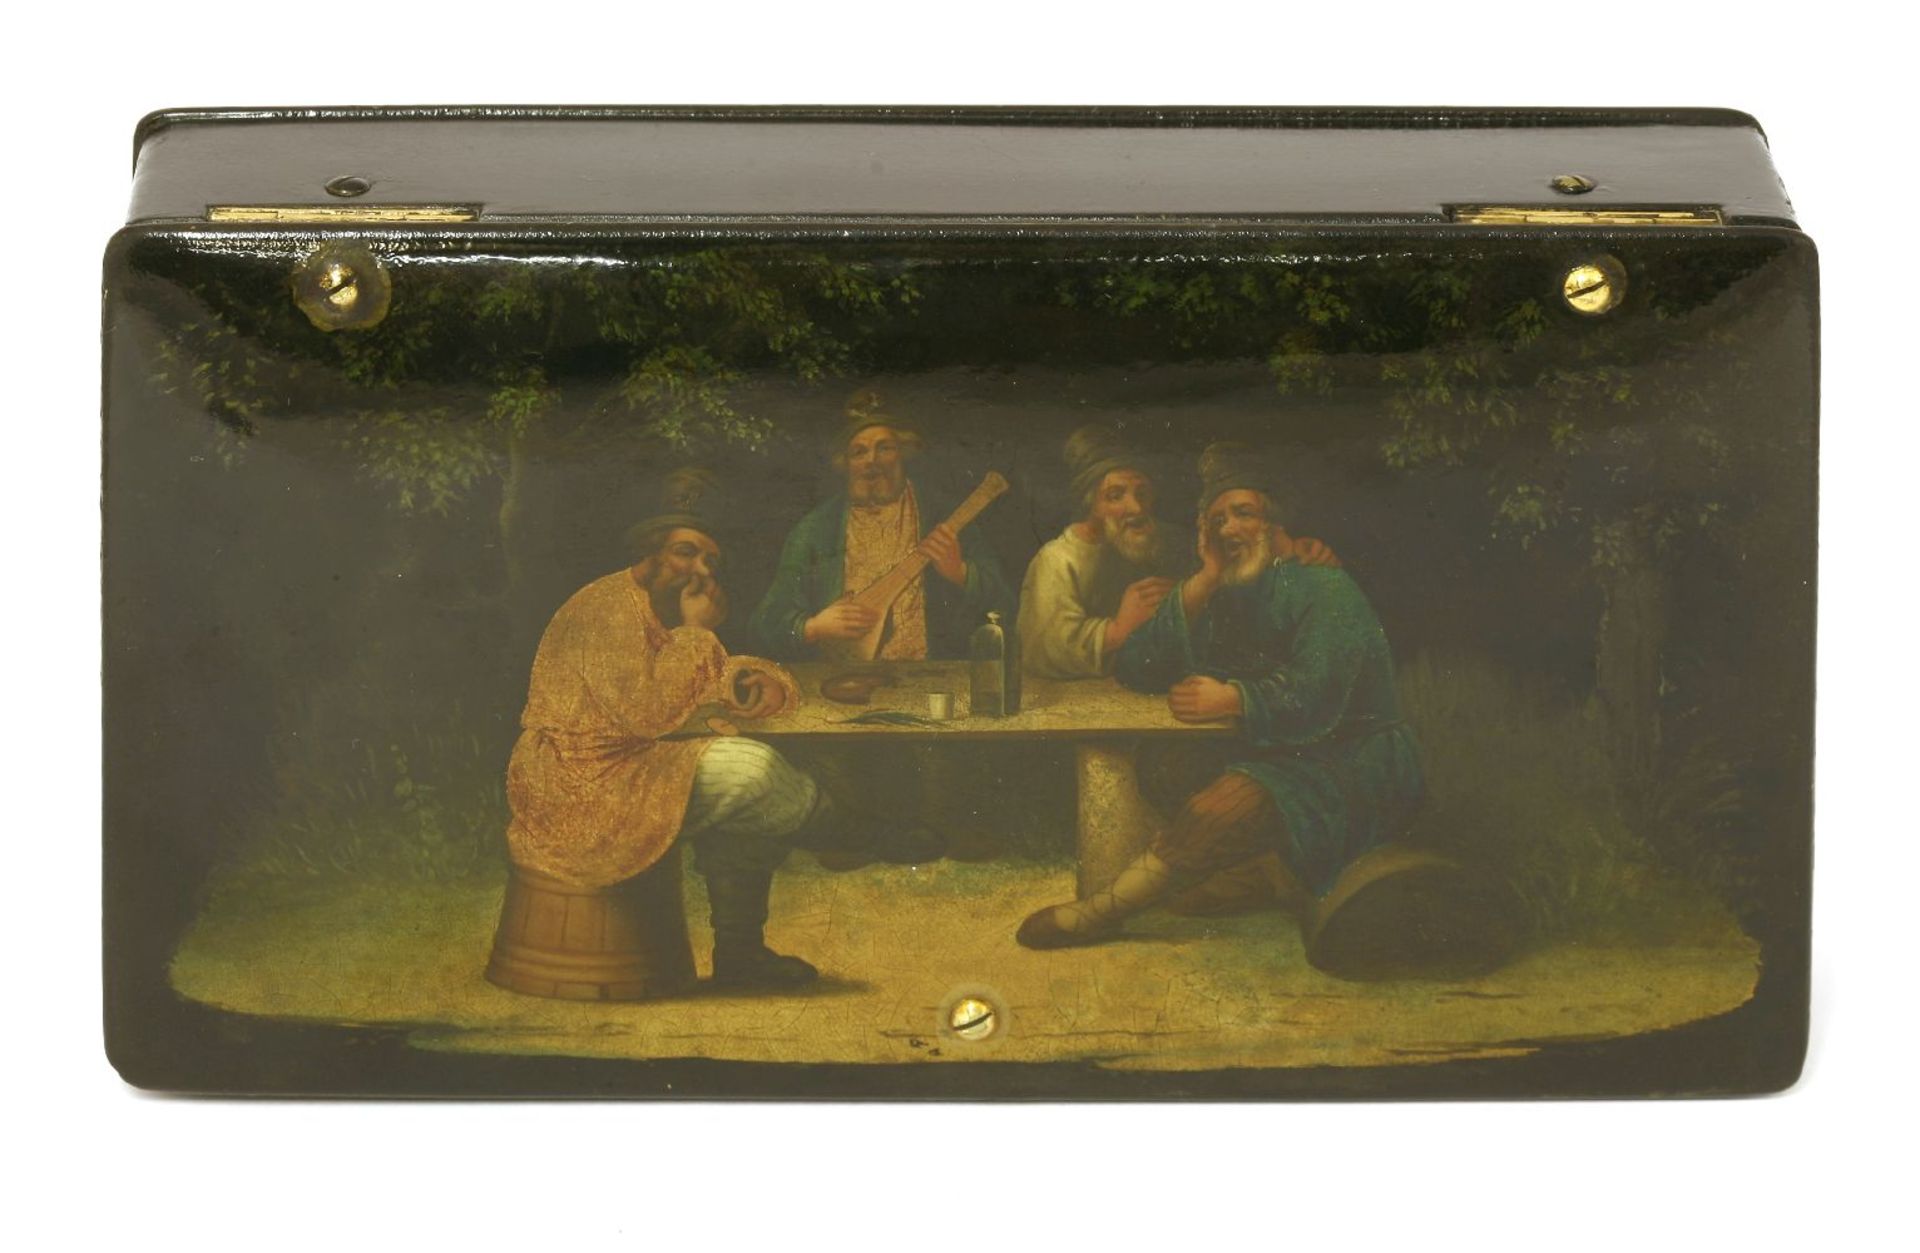 A Russian papier-mâché and lacquer tea box,c.1870, by Lukutin, rectangular, the top painted with - Image 2 of 2